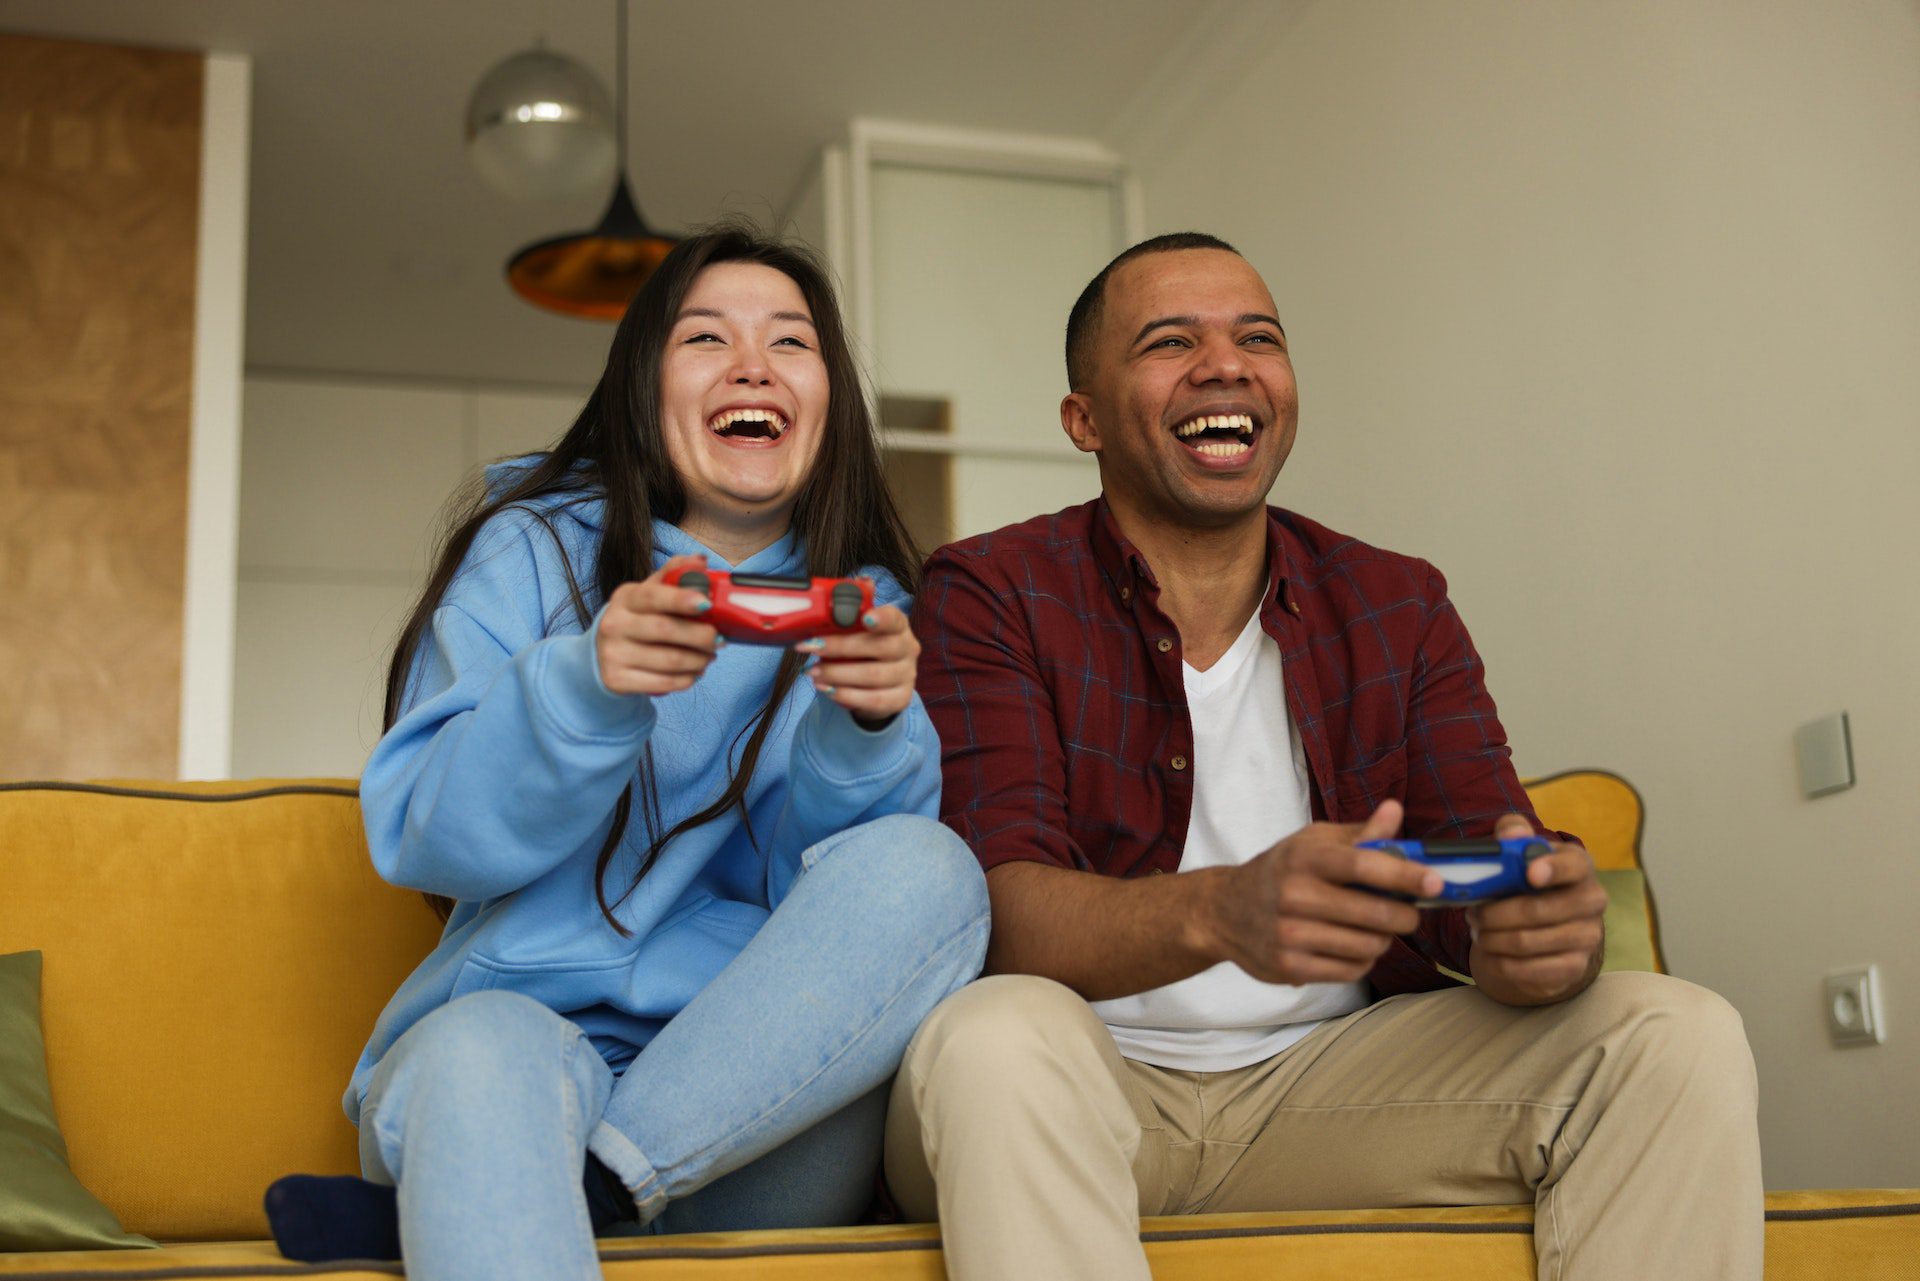 Illustration of the article Top 5 videogames for couples Guaranteed Togetherness